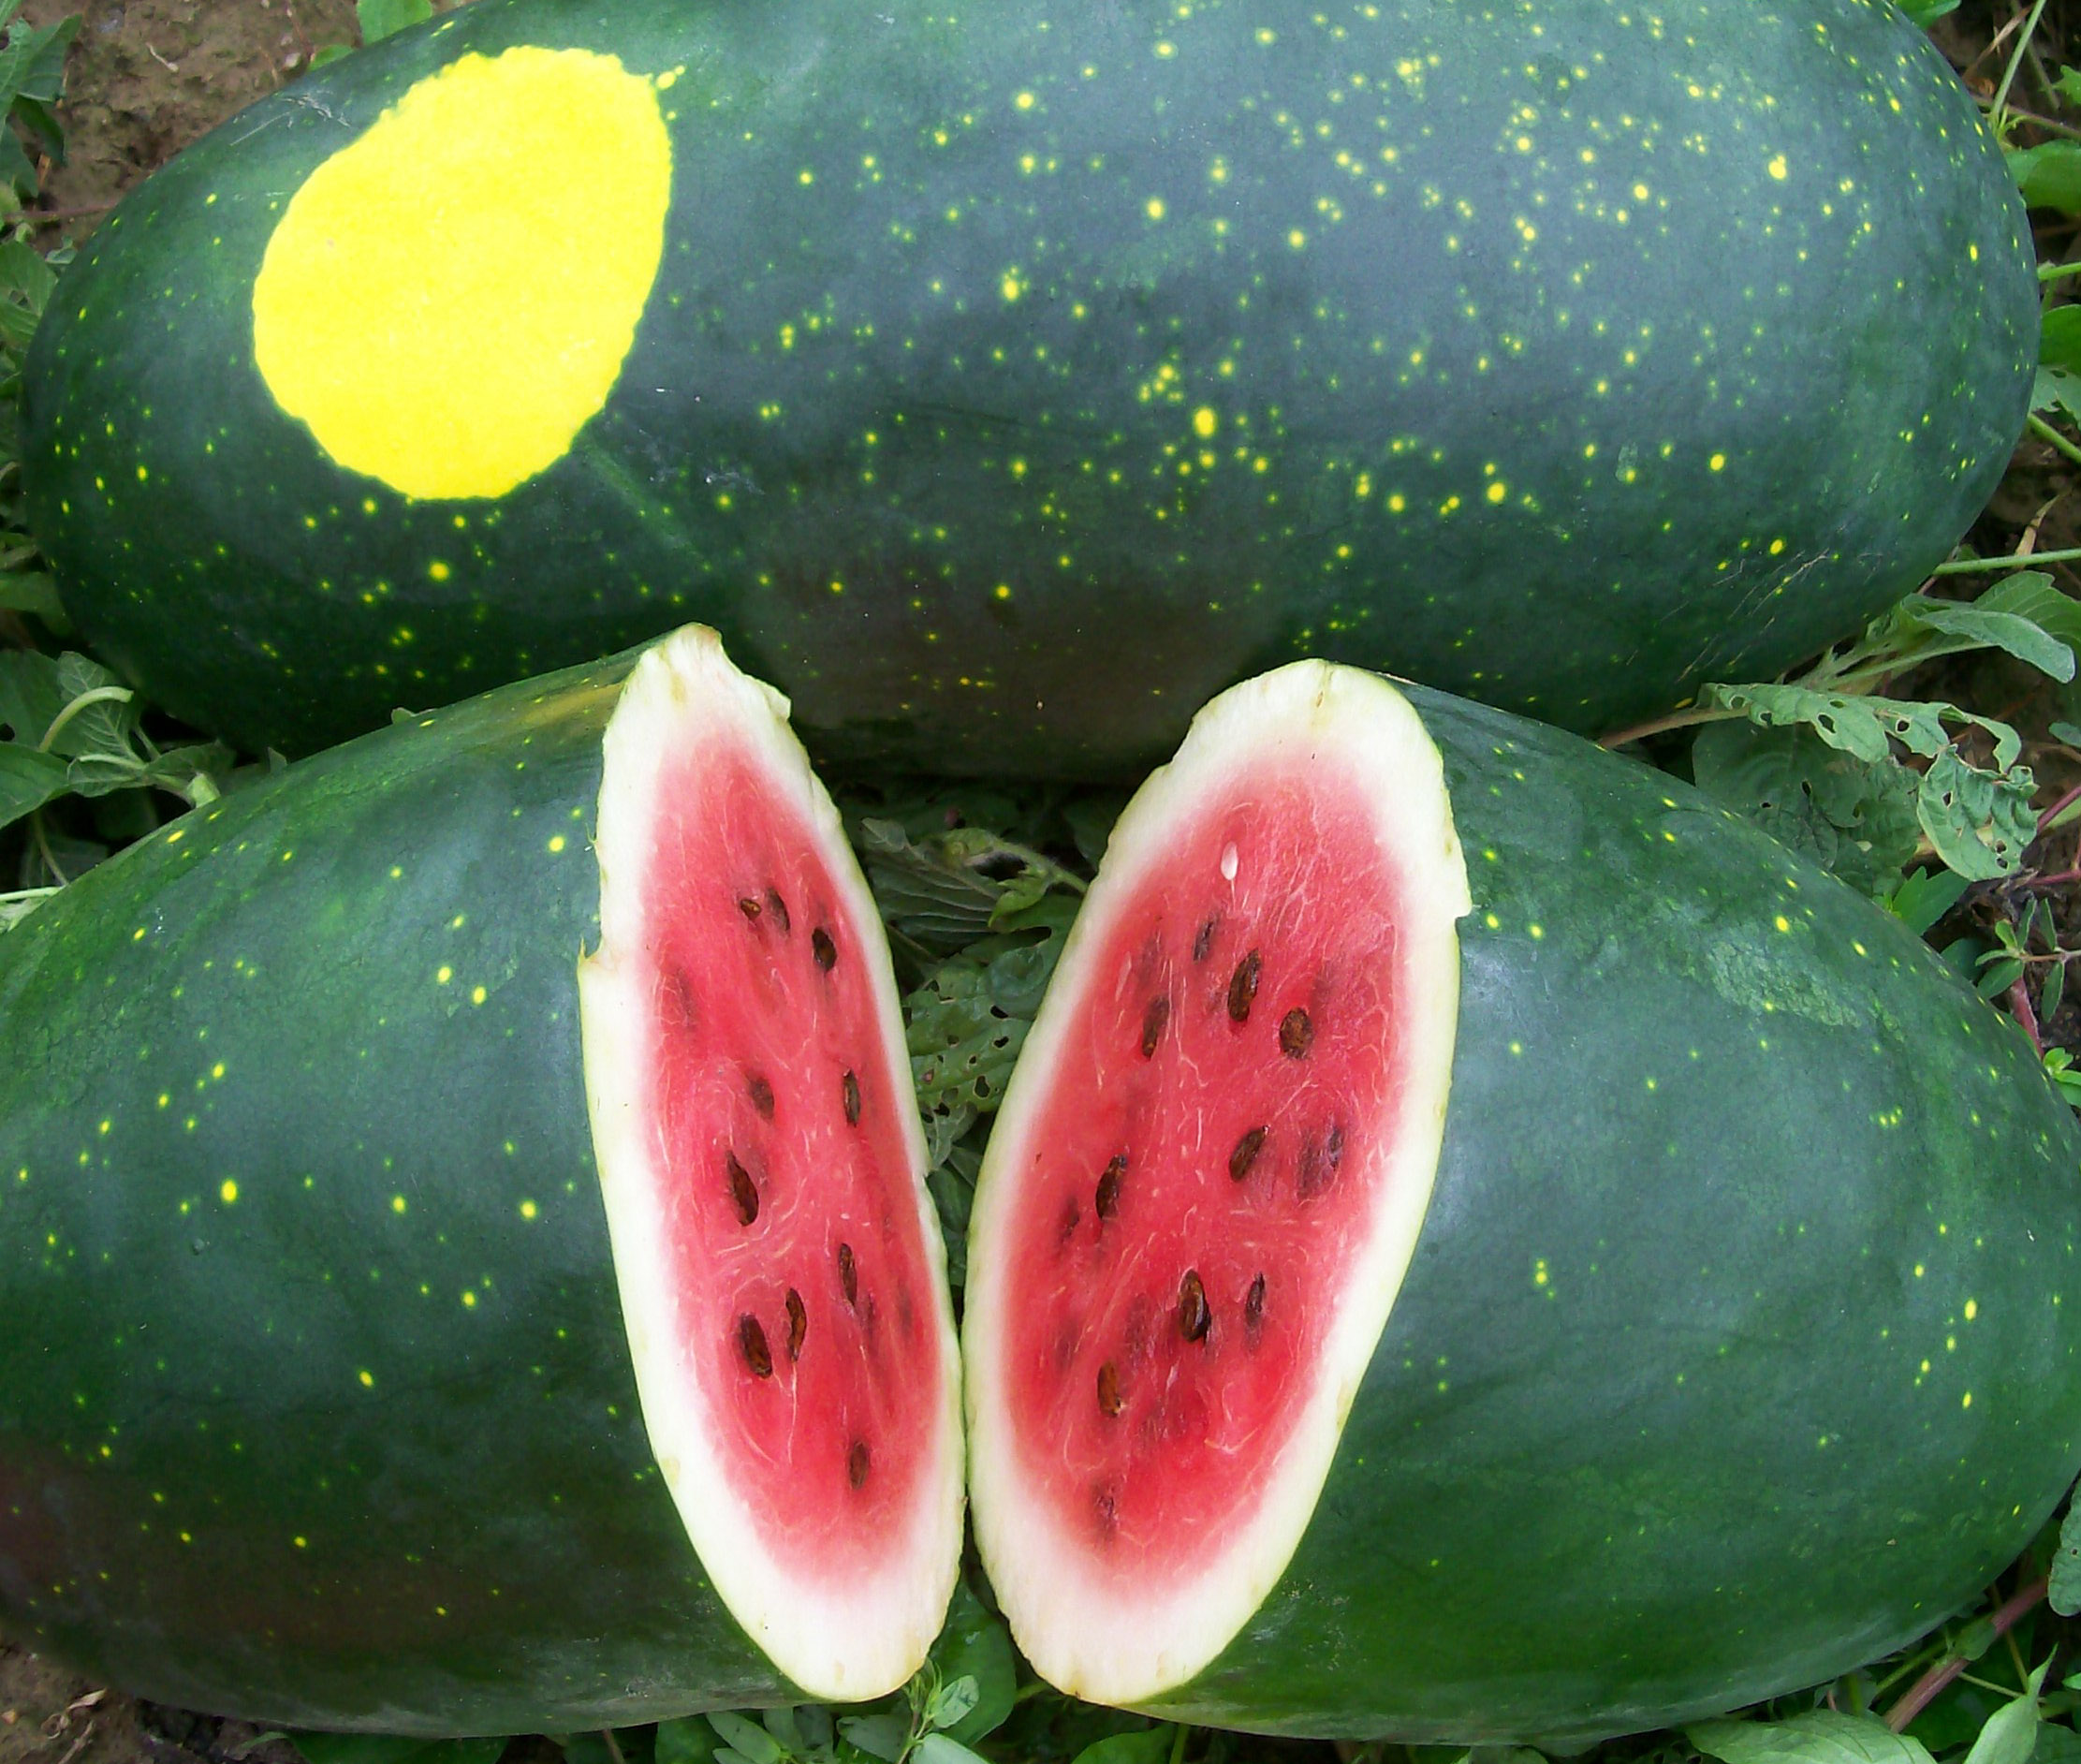 Amish Moon And Stars Watermelon, 3 g : Southern Exposure Seed ...